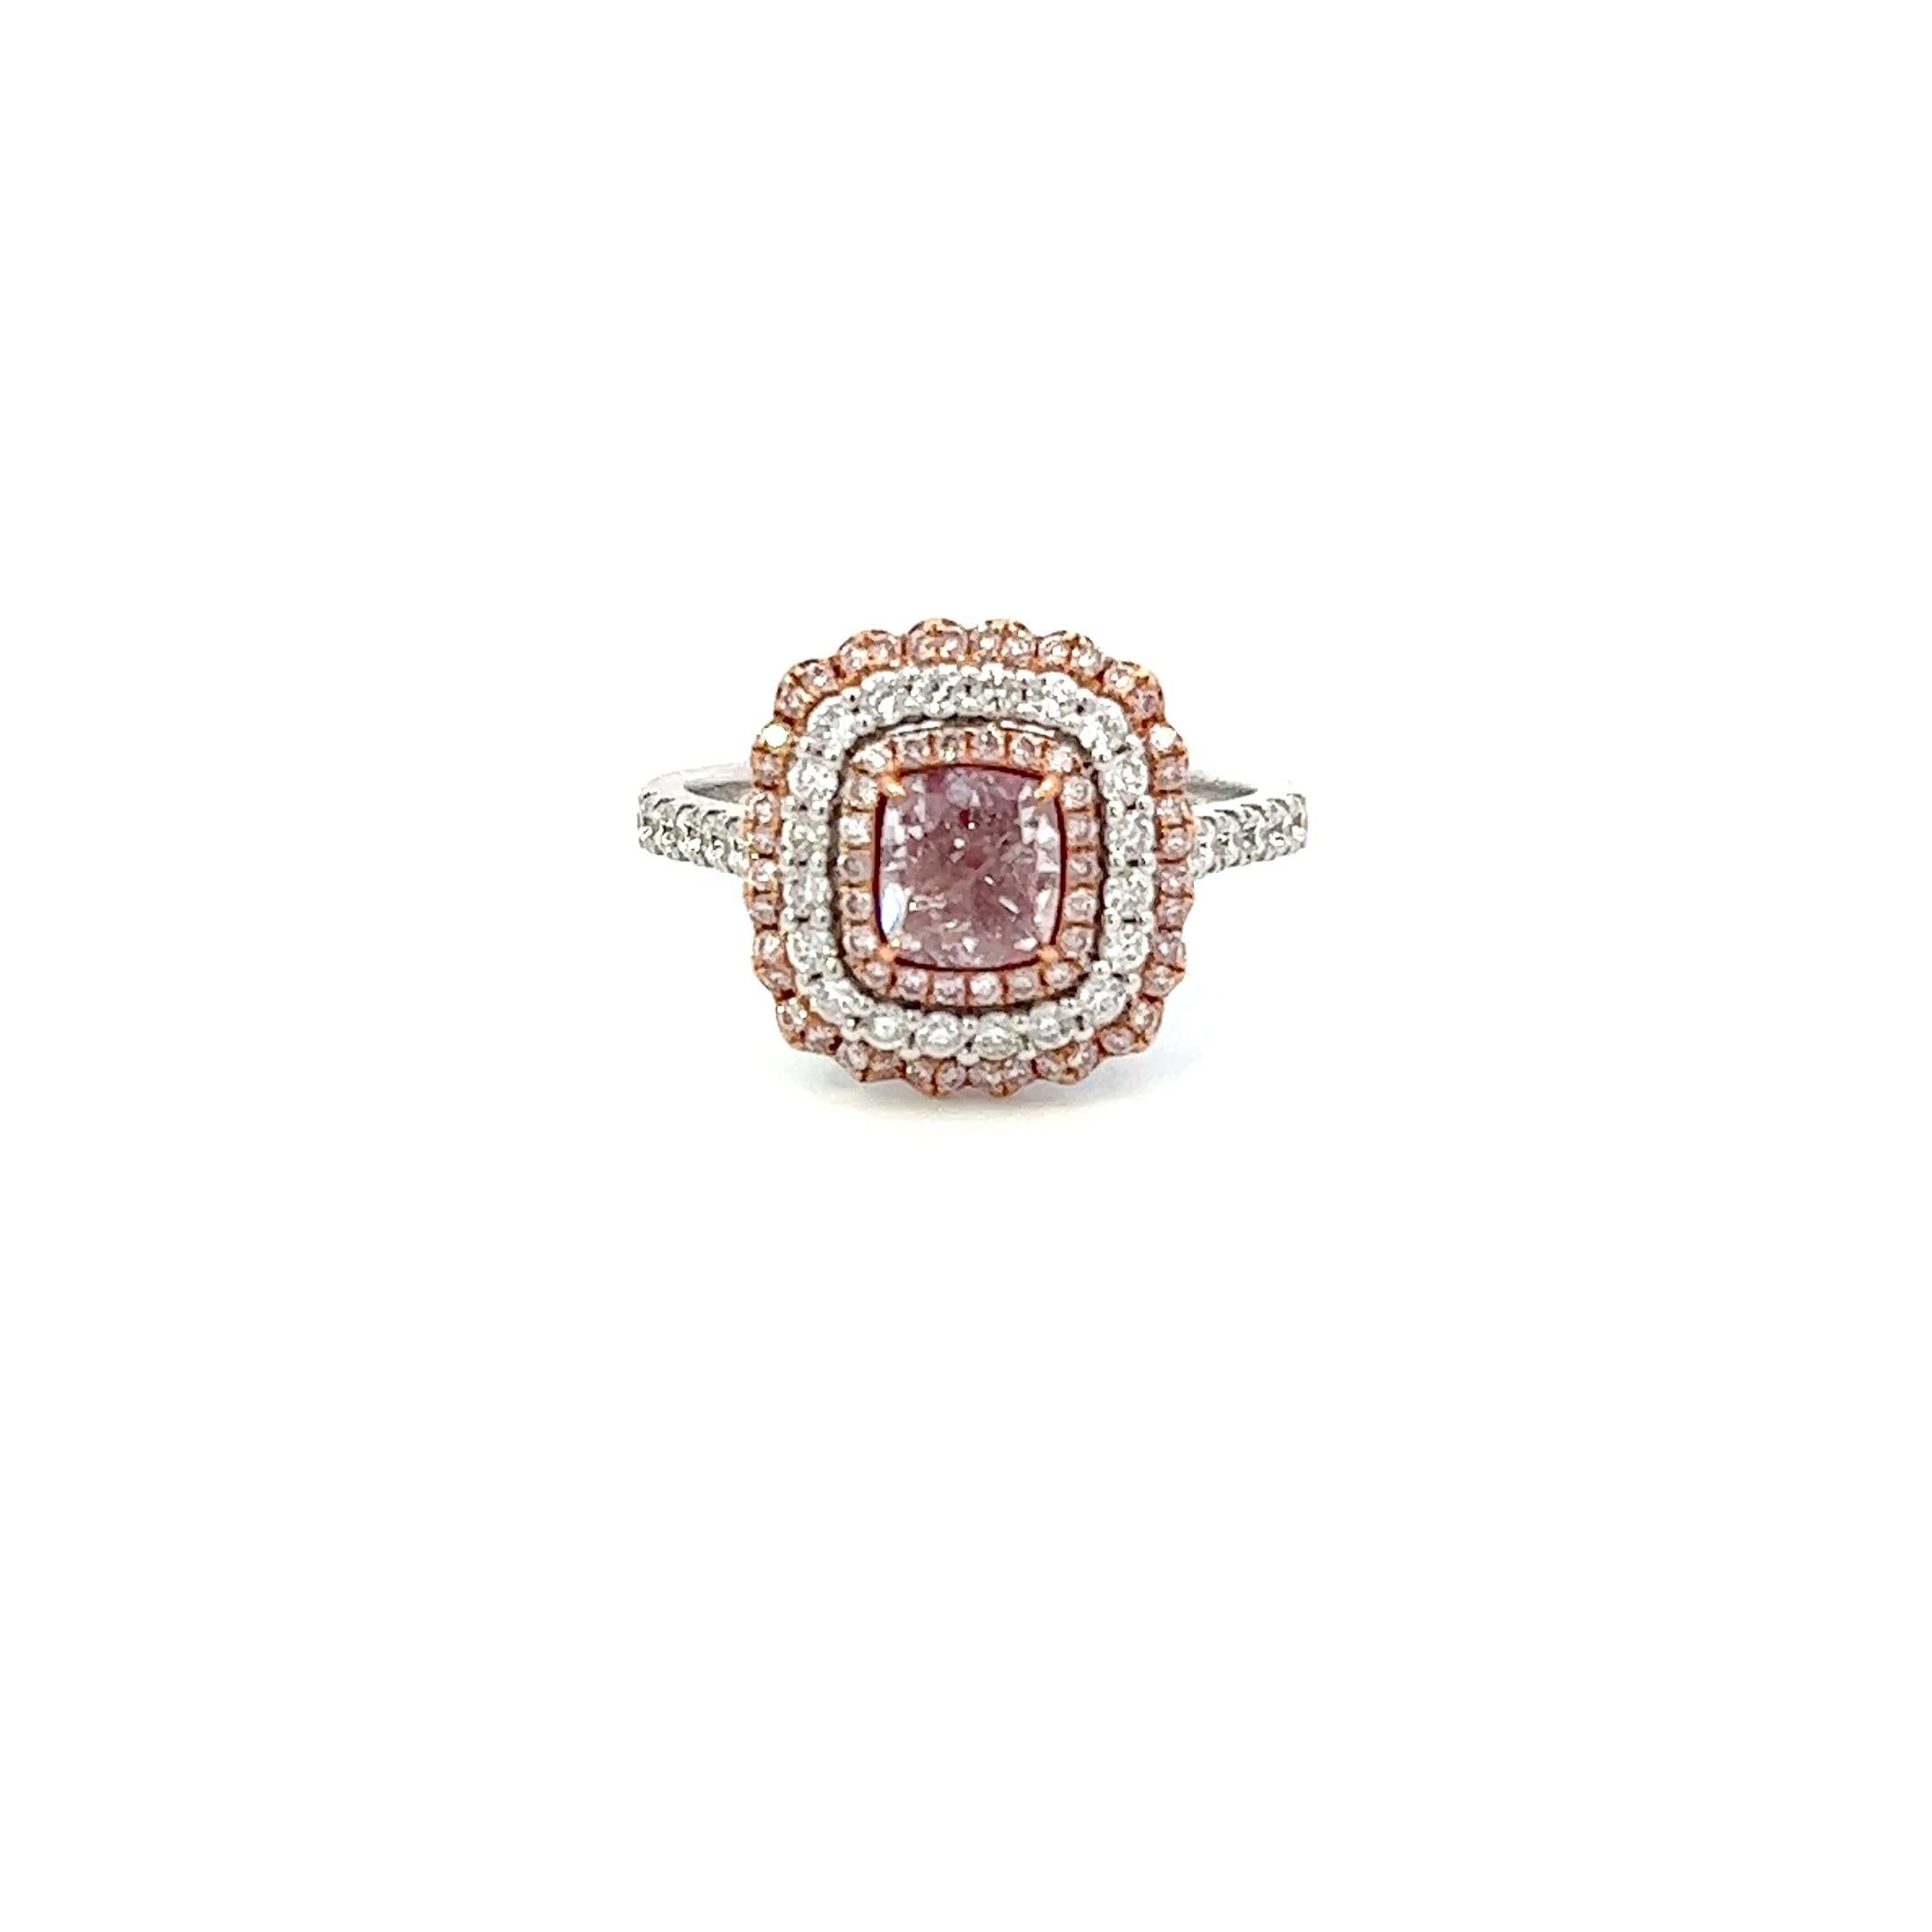 Center: 1.01ct Fancy Brownish Purplish Pink Cushion I2 GIA#2378237542
Setting: 18K White Gold 0.62ct Pink and White Diamonds

An extremely rare and stunning natural pink diamond center. Pink Diamonds account for less than 0.01% of all diamonds mined